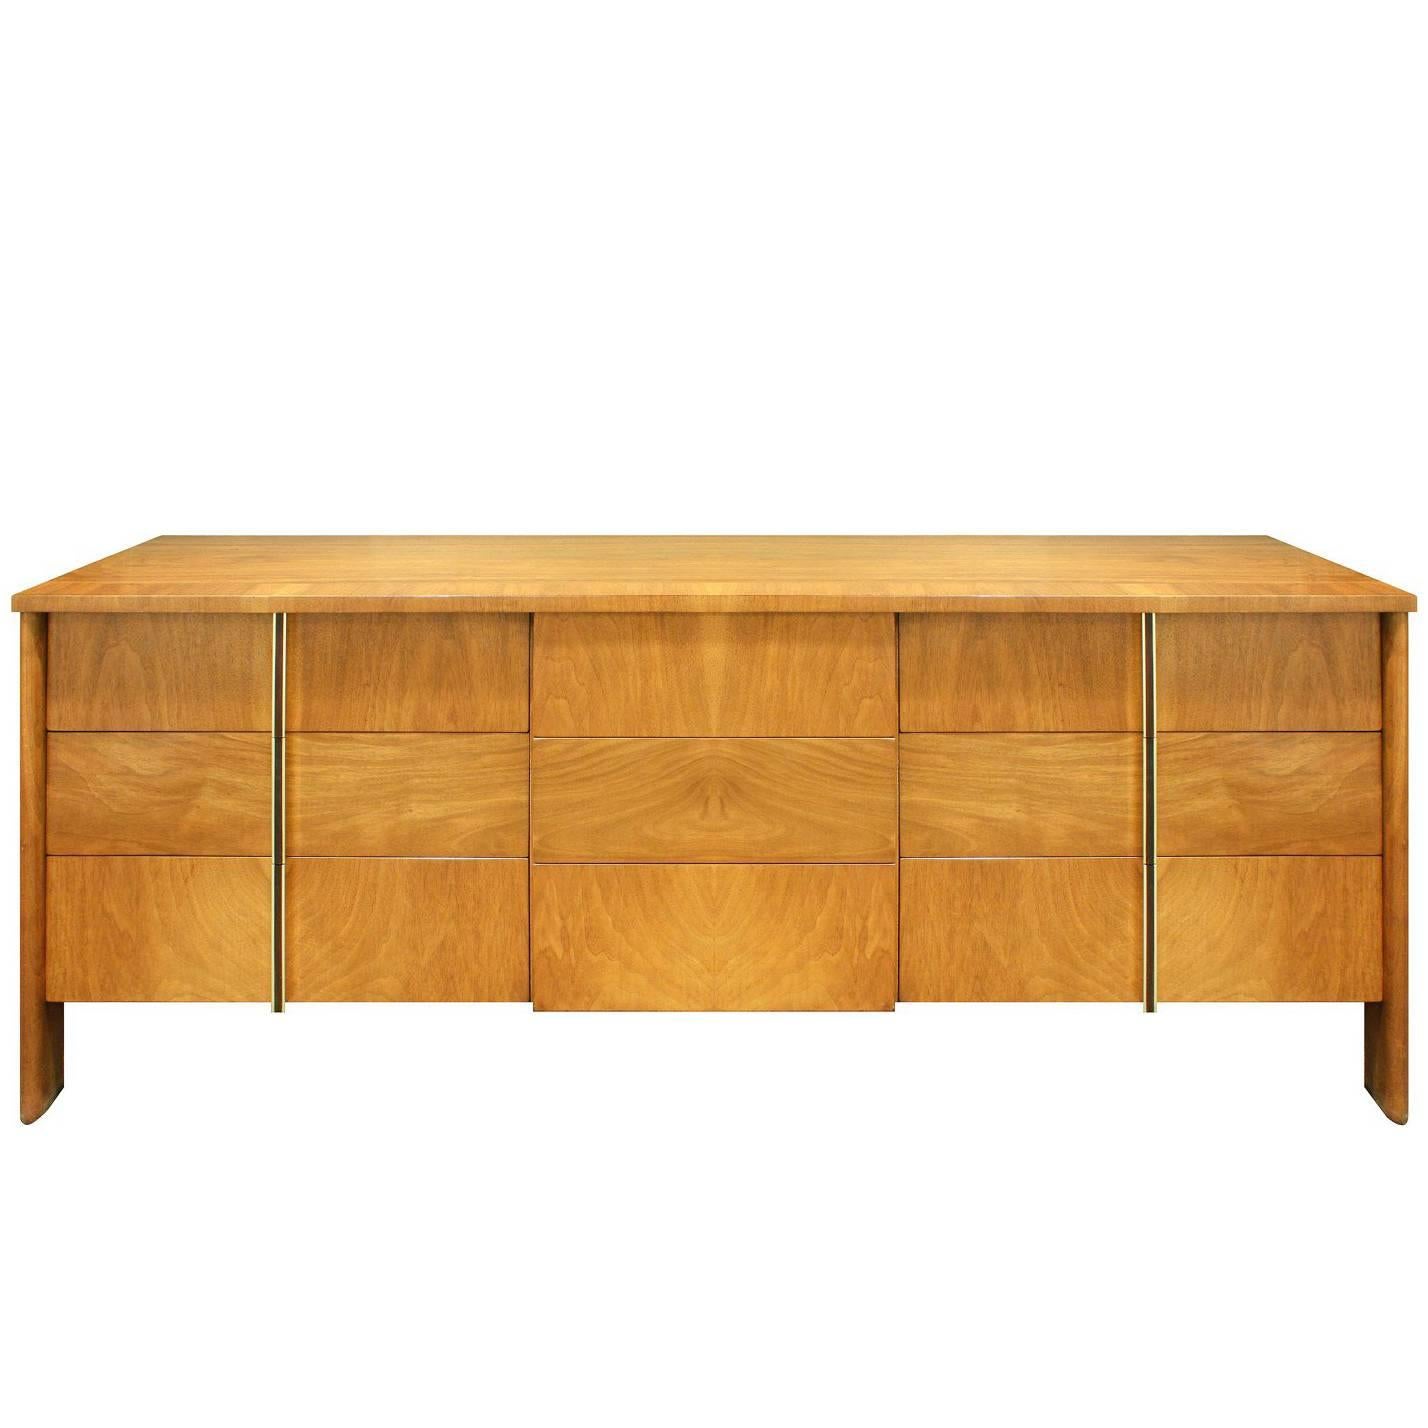 John Widdicomb Chest of Drawers in Walnut with Rosewood and Chrome Pulls, 1950s